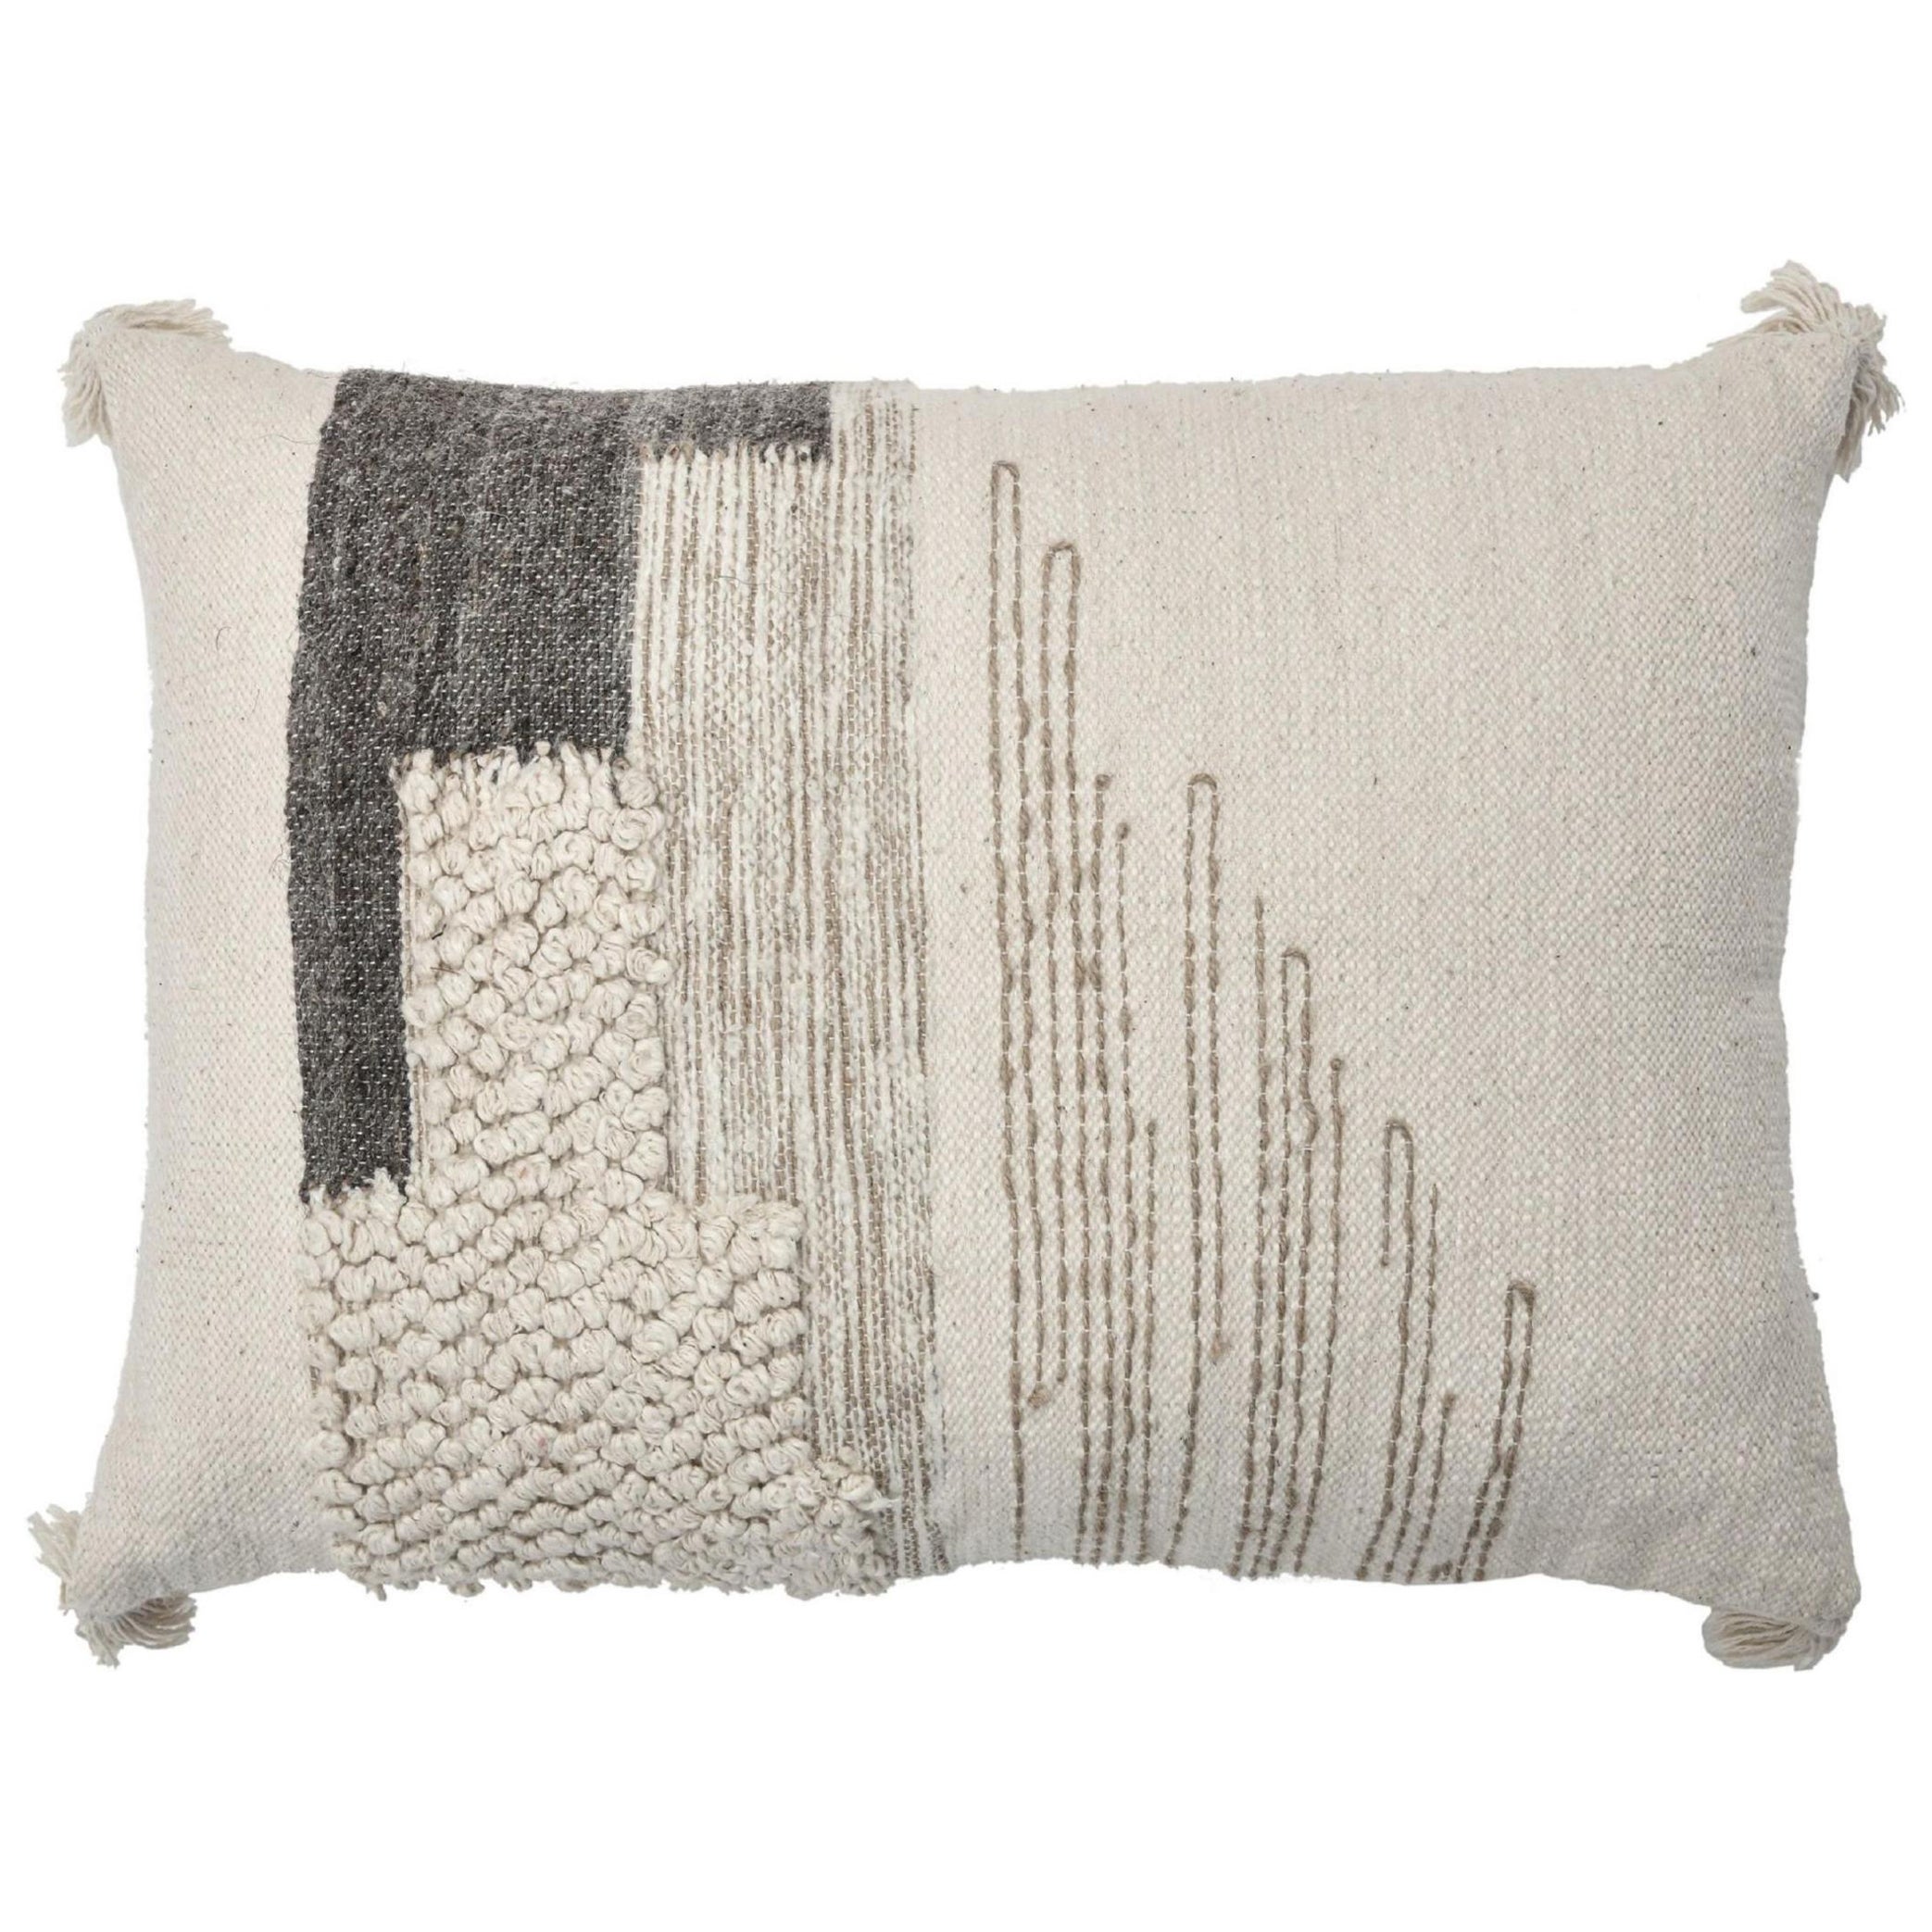 Contemporary Boho Chic Style Wool and Cotton Pillow In Beige For Sale